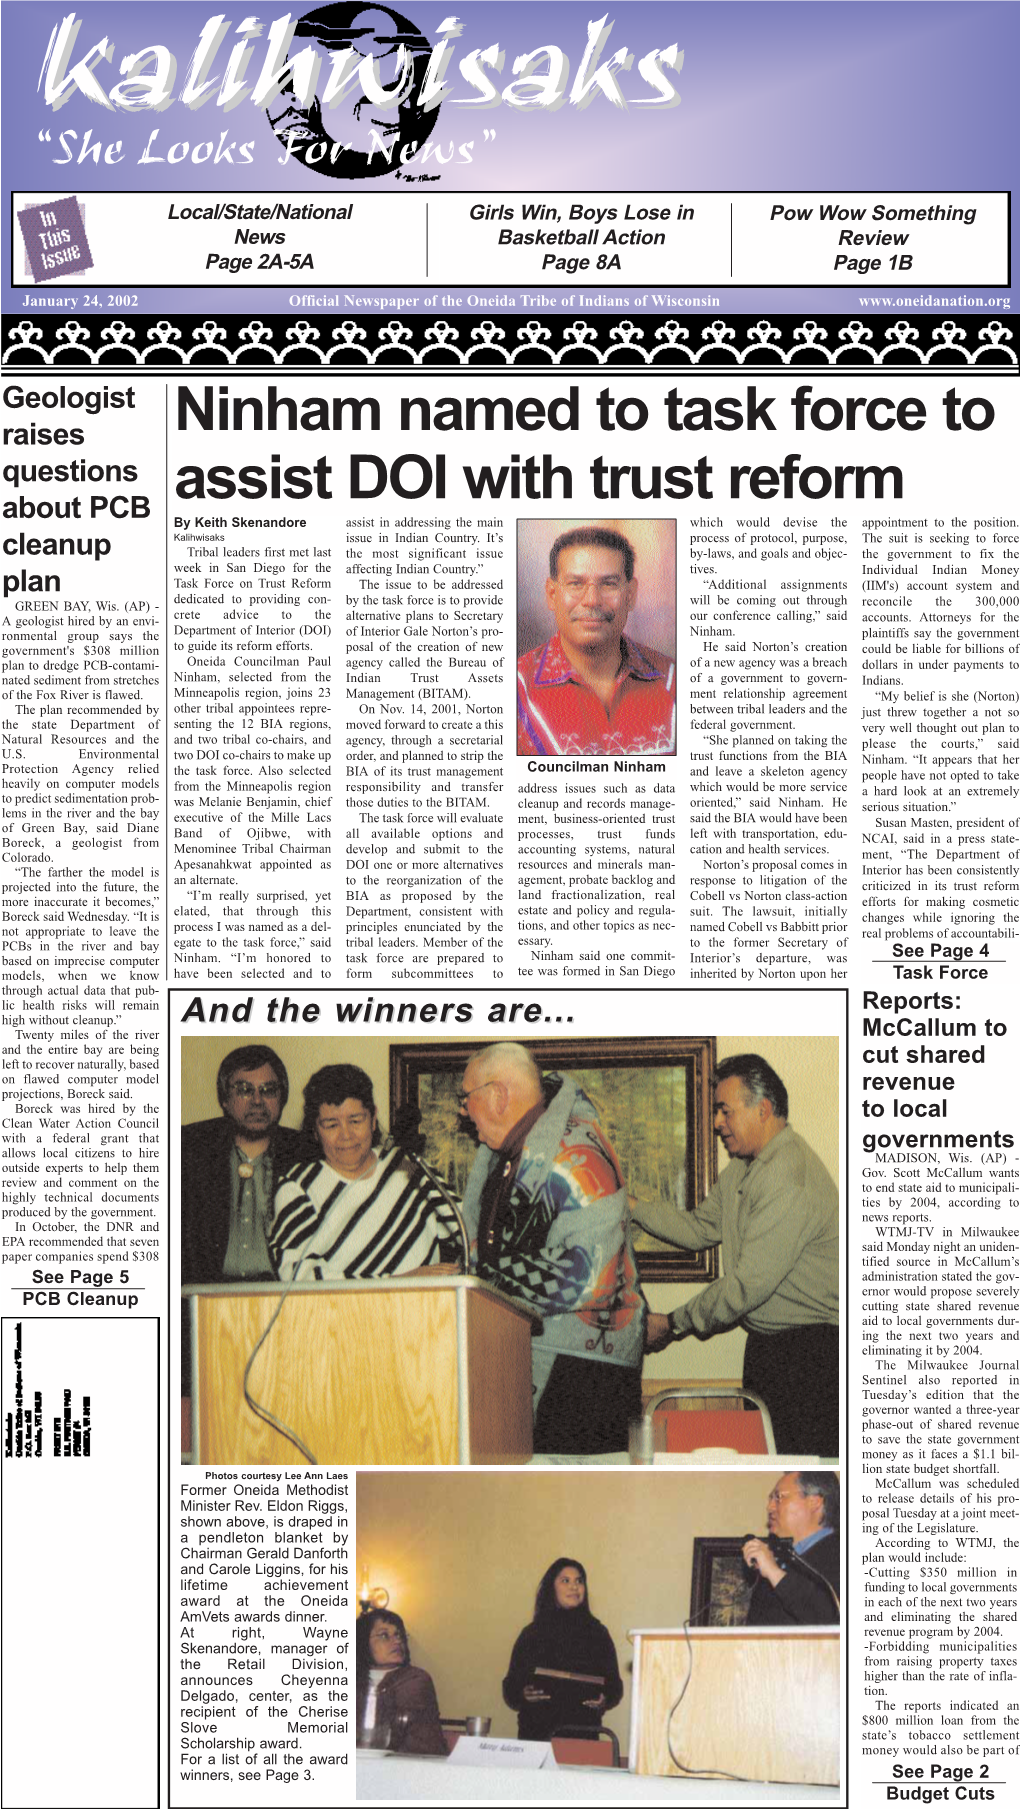 Ninham Named to Task Force to Assist DOI with Trust Reform